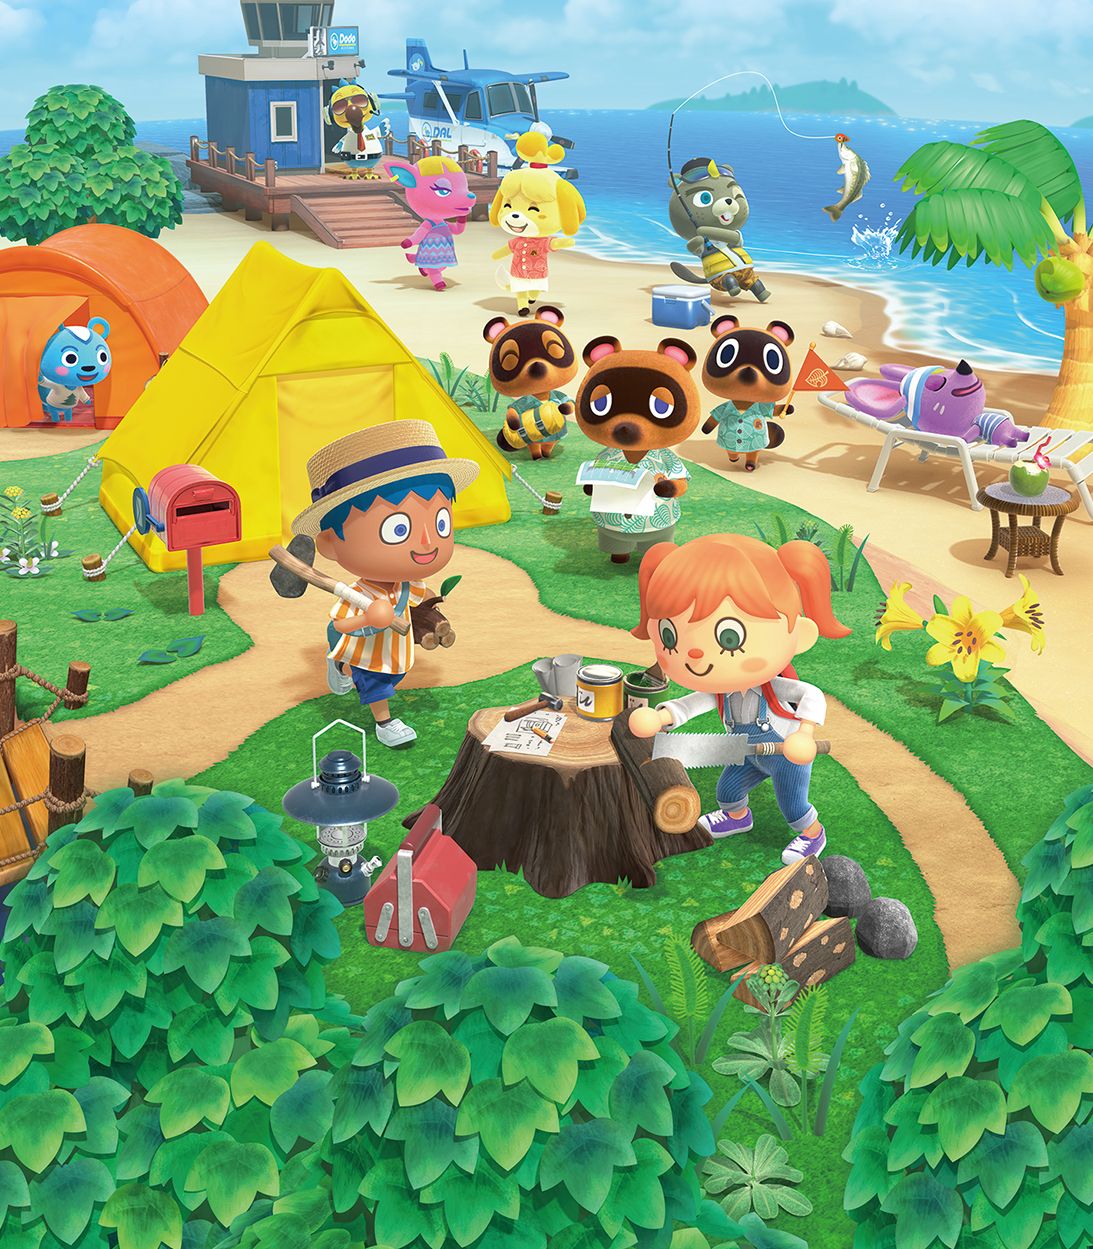 The best ways to earn money in Animal Crossing: New Horizons - The